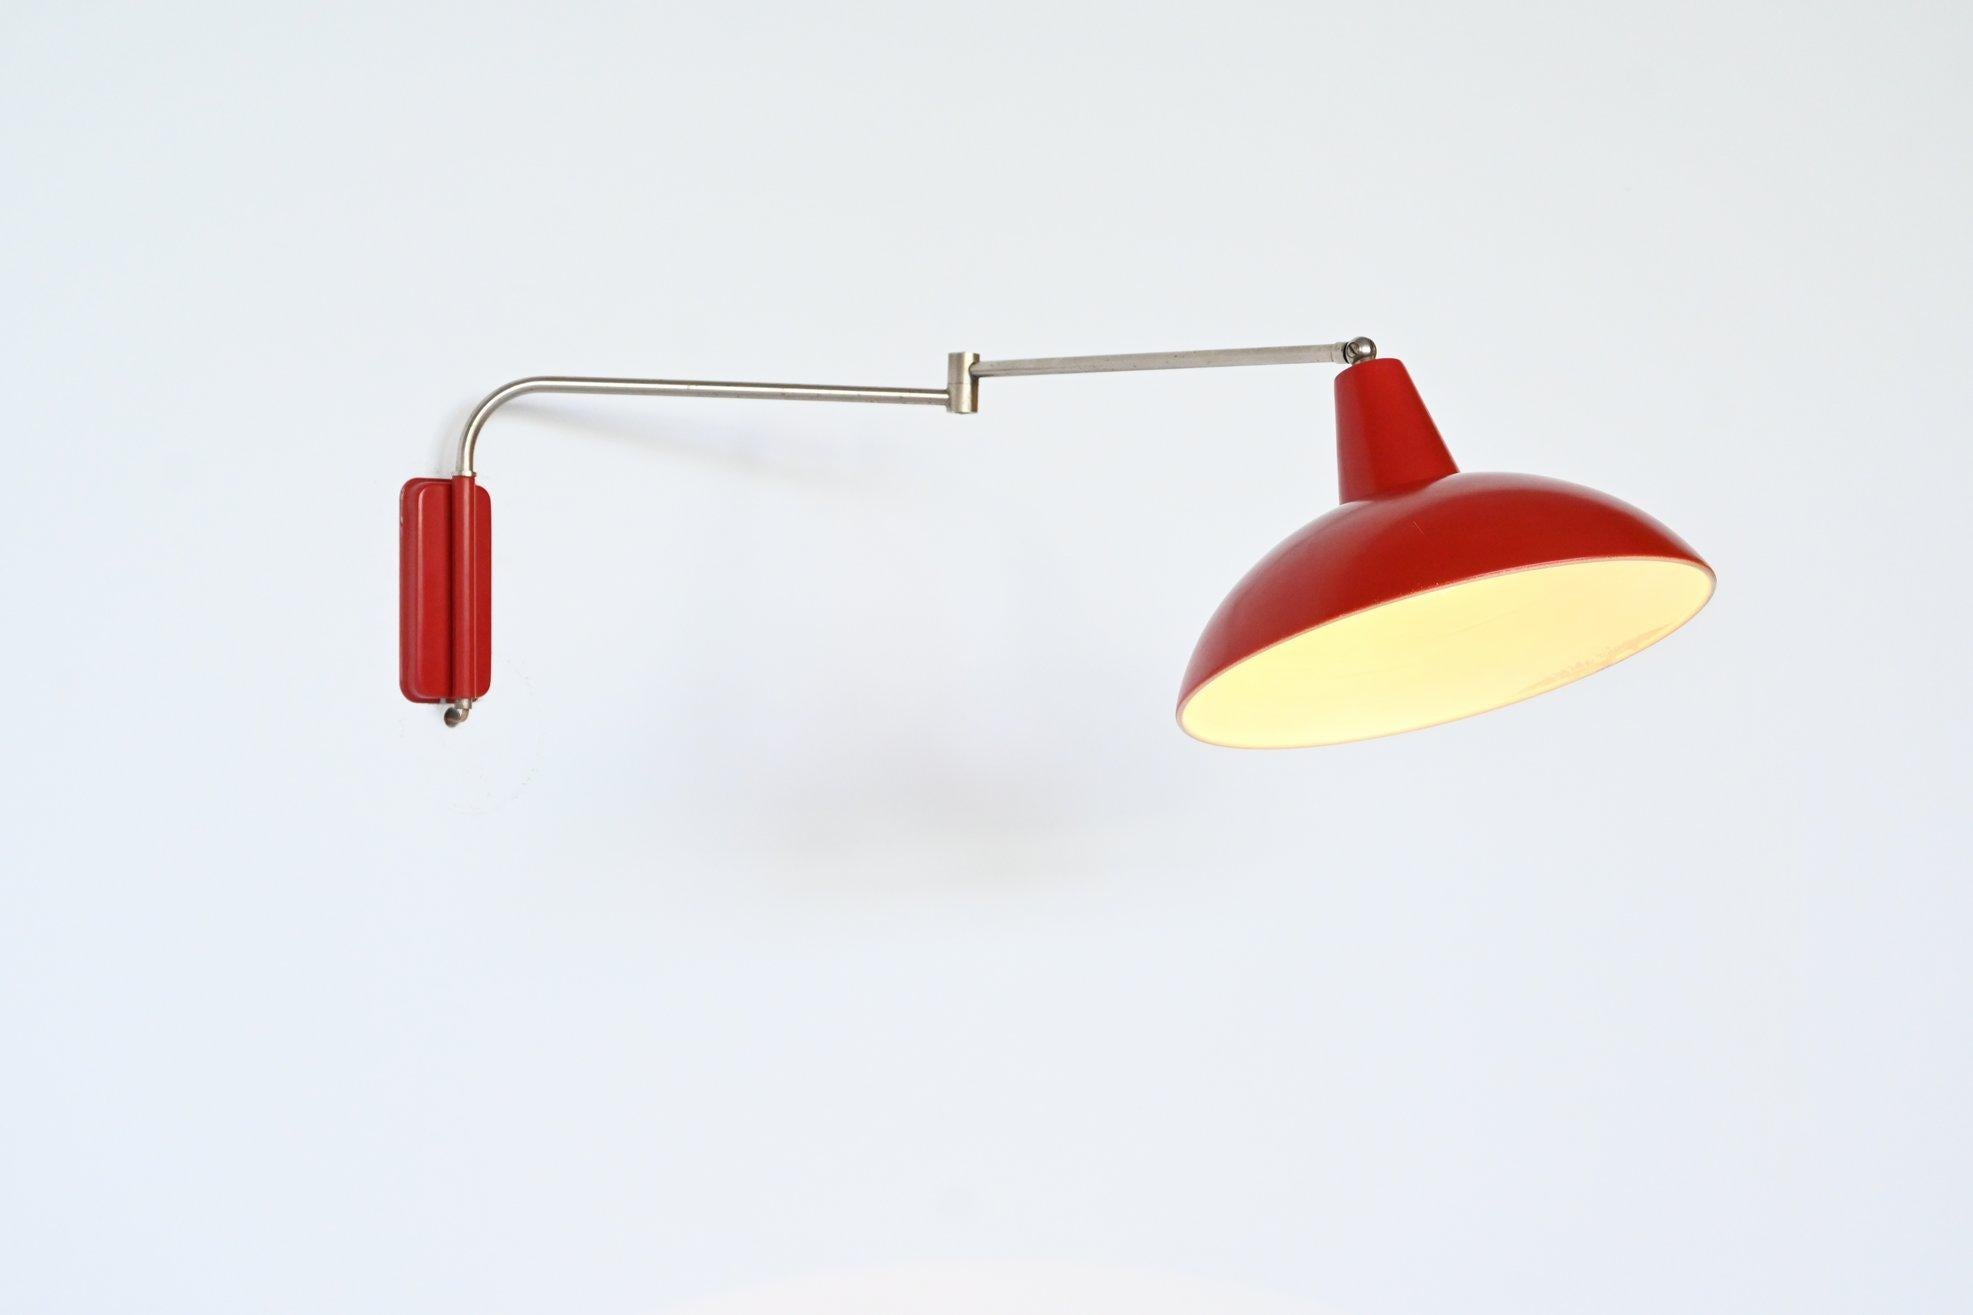 Beautiful and rare wall lamp designed by JJM Hoogervorst for Anvia Almelo, The Netherlands 1950. The lamp has an nickel plated chrome wall arm and original red lacquered shade and wall plate. It is adjustable in many different positions and gives